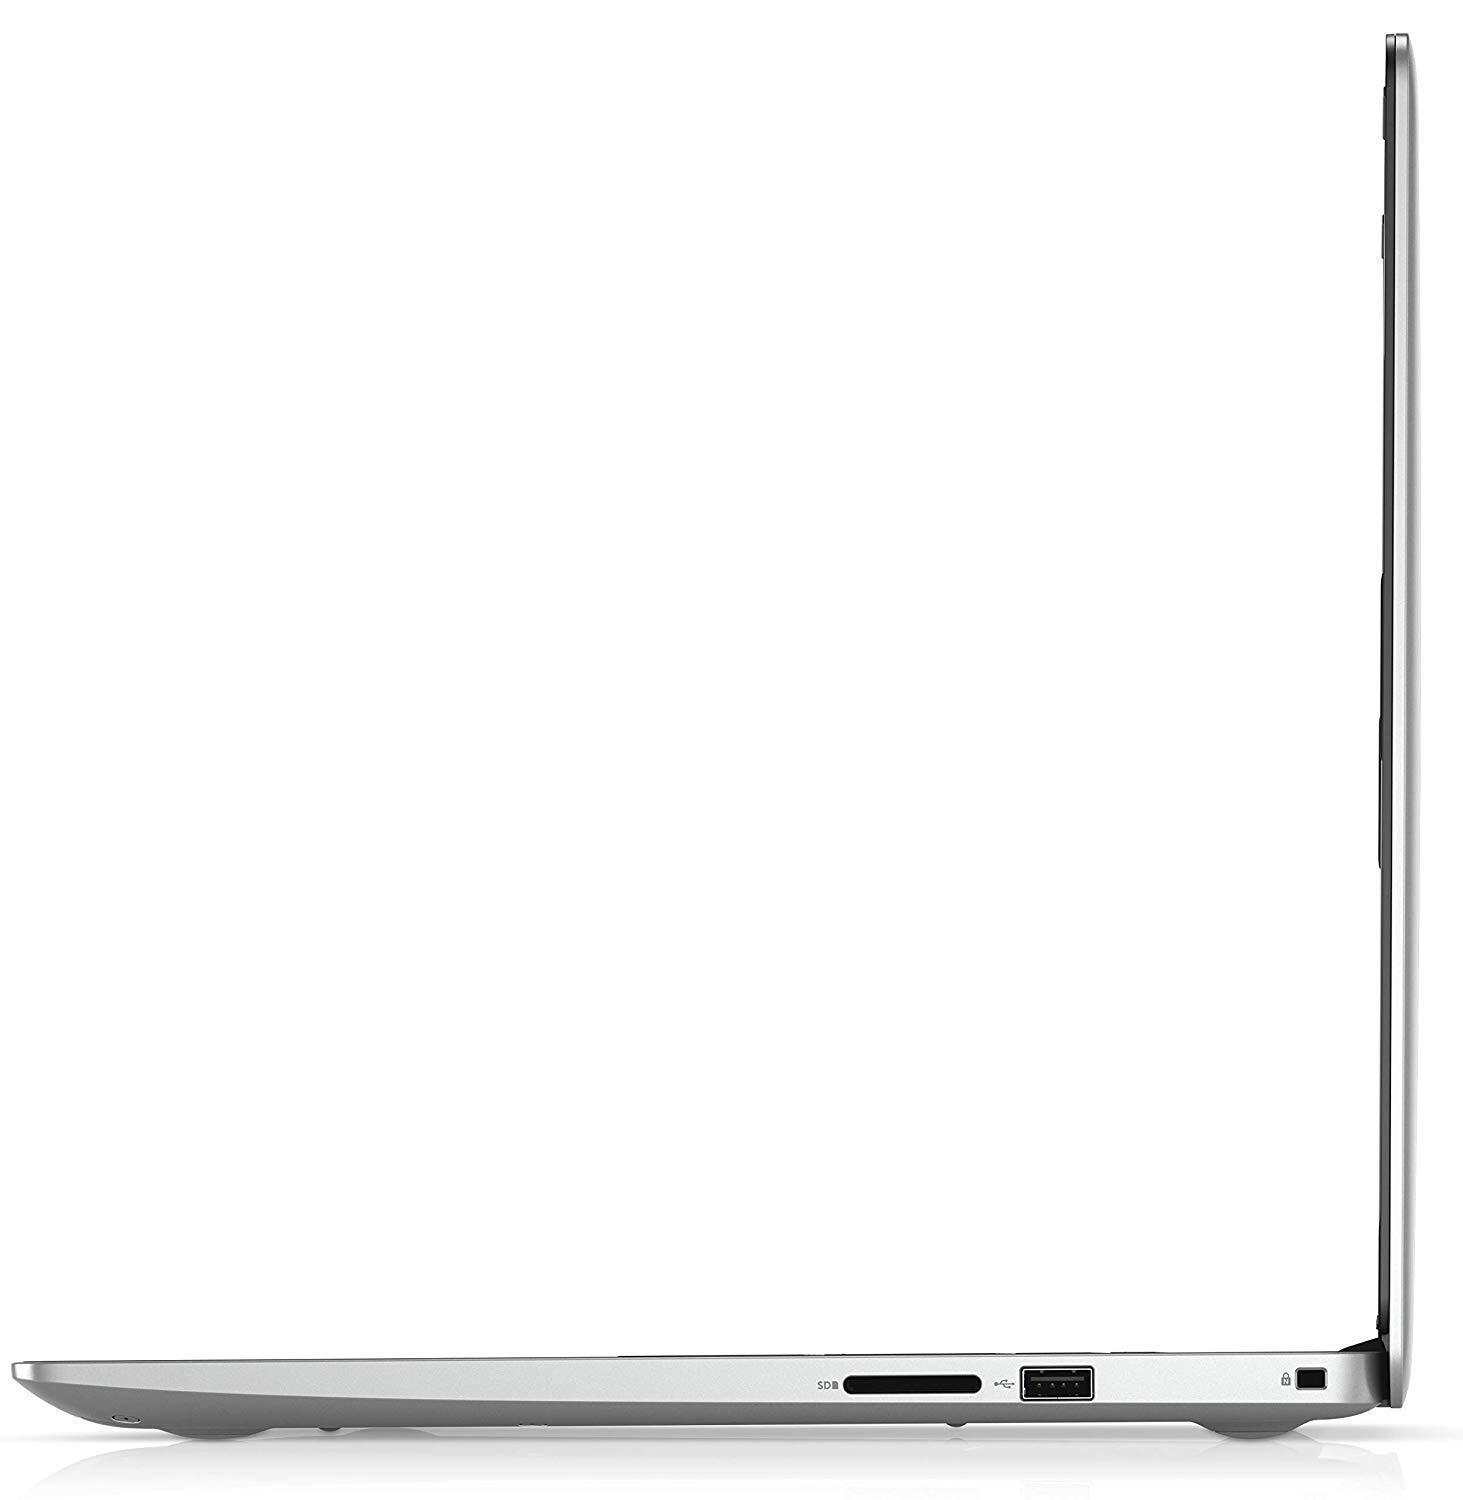 Dell Inspiron 3595 15.6-inch Laptop (A6-9225/4GB/1TB HDD/Windows 10 + MS Office/Radeon R4 Integrated Graphics/Silver)-M000000000278 www.mysocially.com